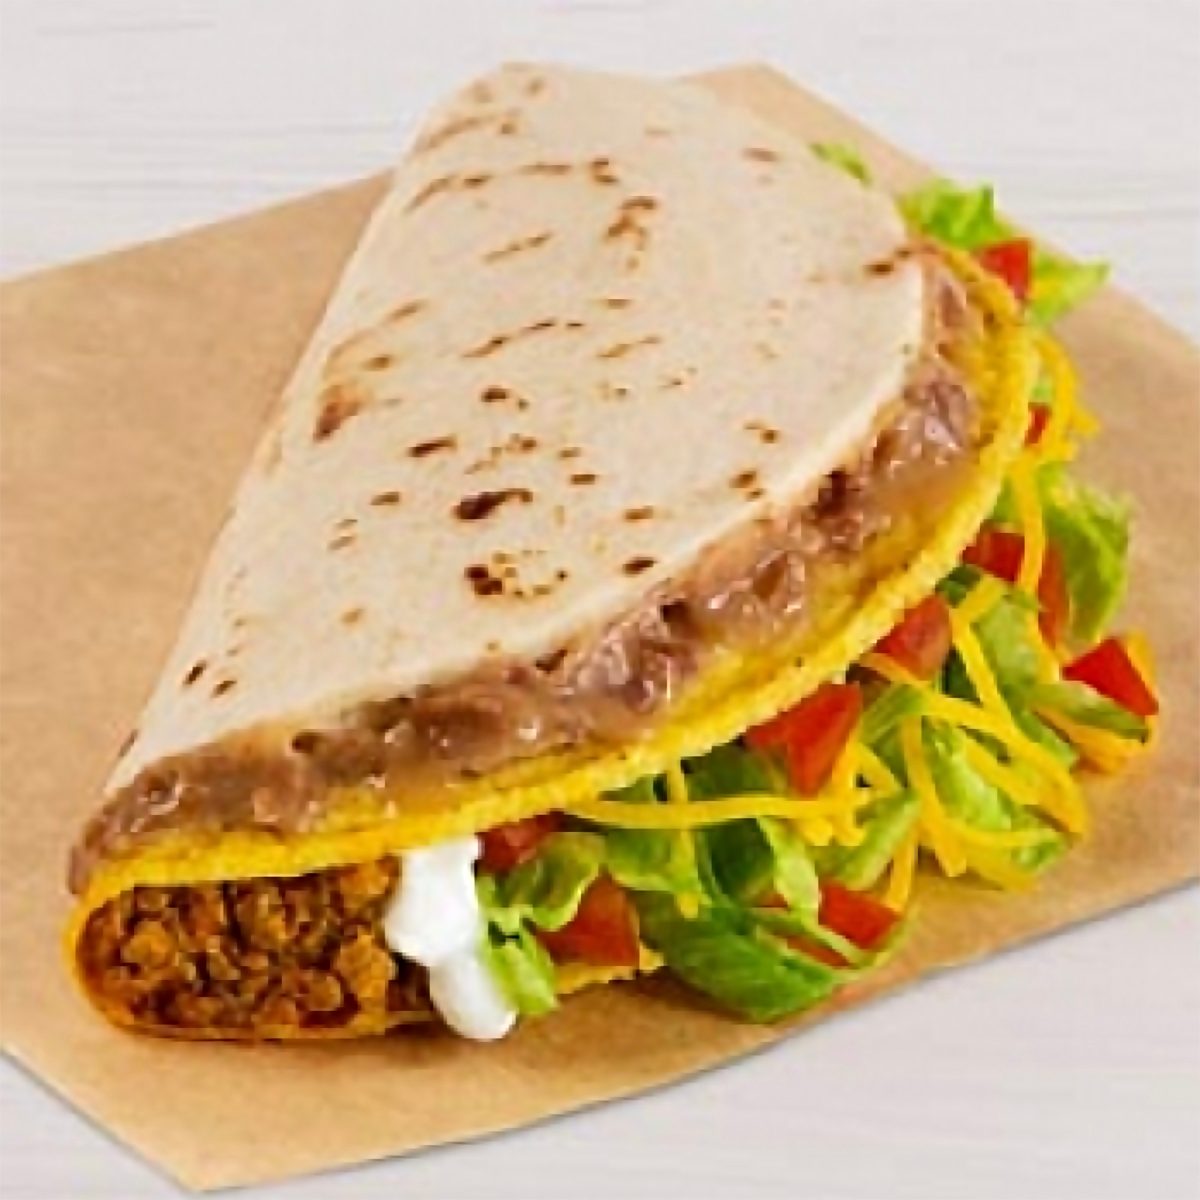 7 Discontinued Taco Bell Items That People Want Back Taste of Home